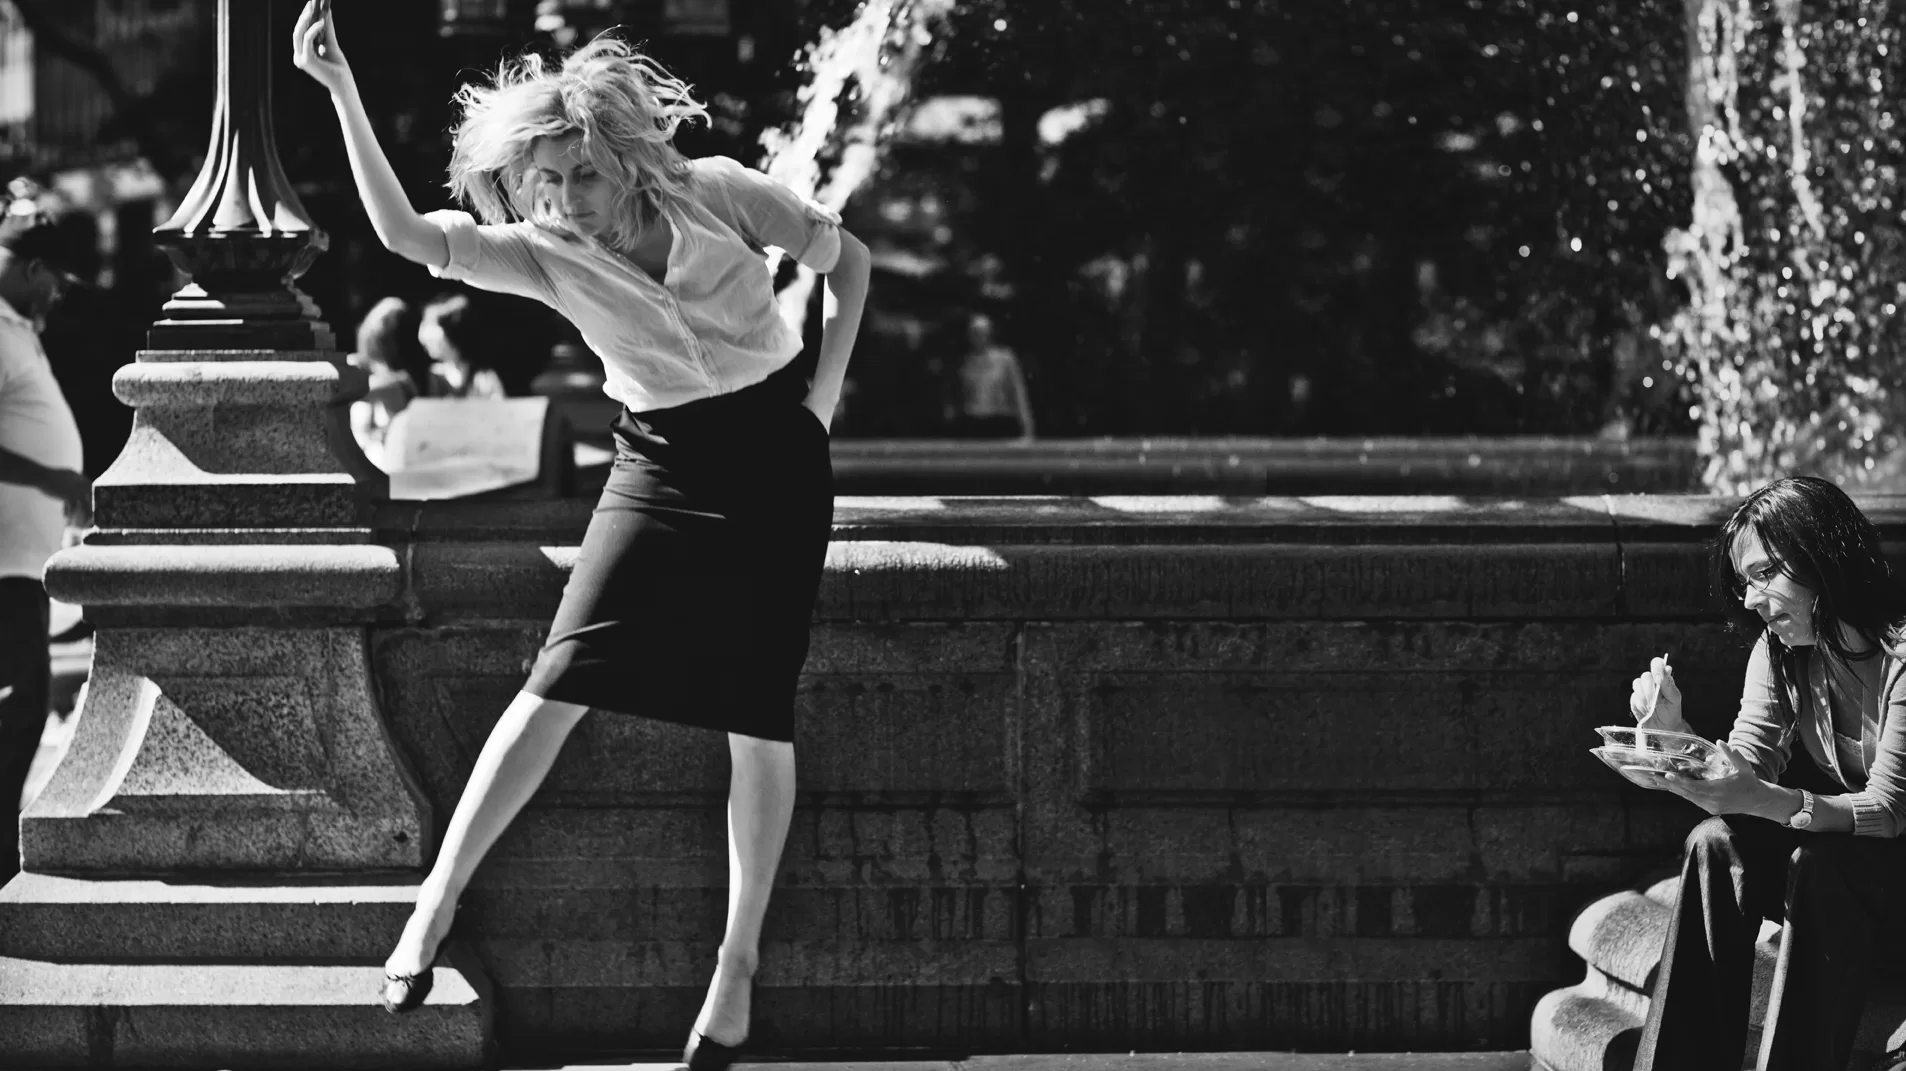 Frances Ha (Greta Gerwig) dances her way through life, the city, and the unnerving challenges of growing closer and further apart from her hopes, dreams, and friendships | Agents of Fandom